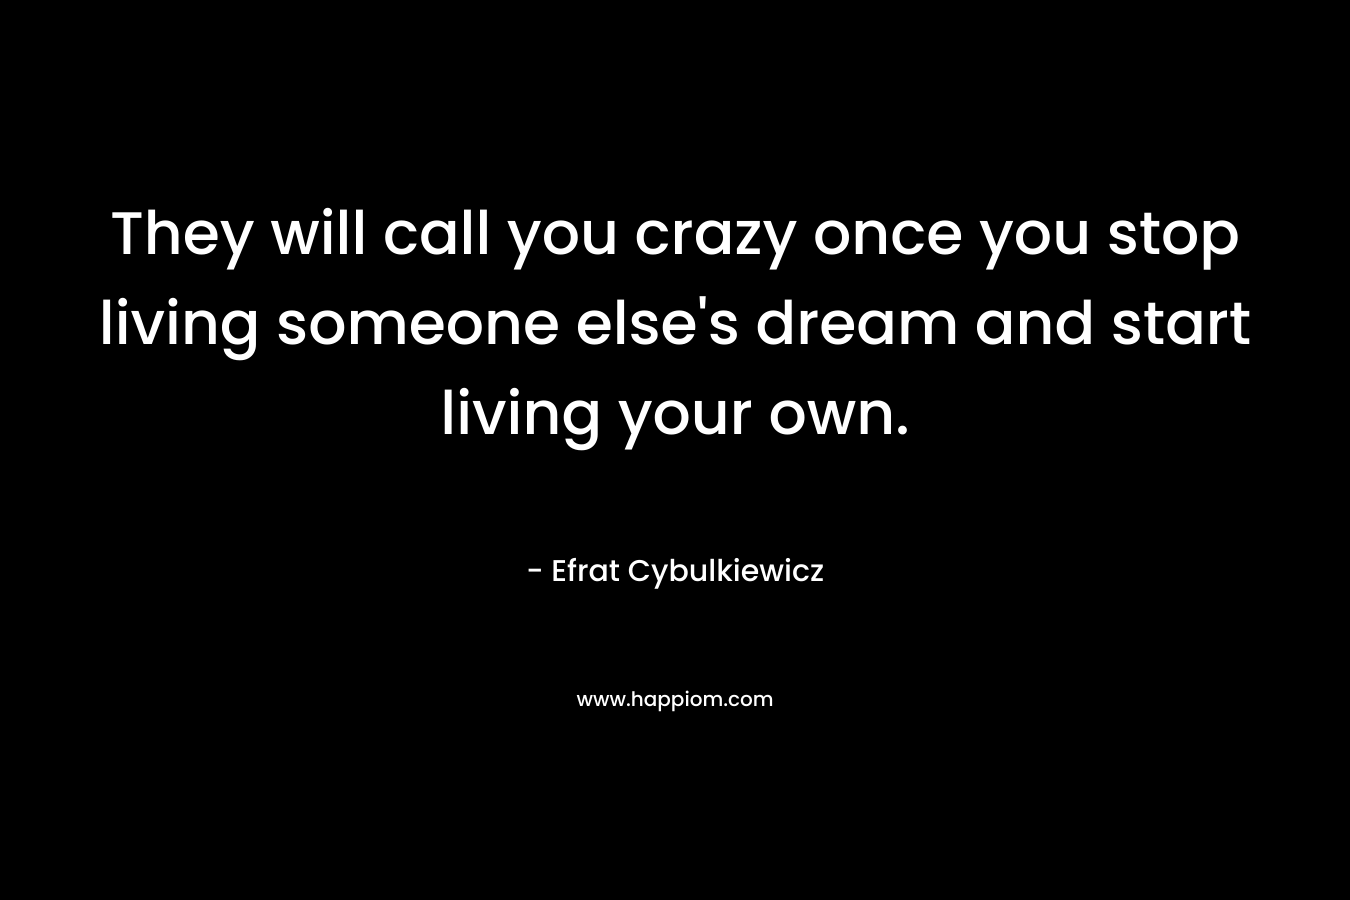 They will call you crazy once you stop living someone else's dream and start living your own.